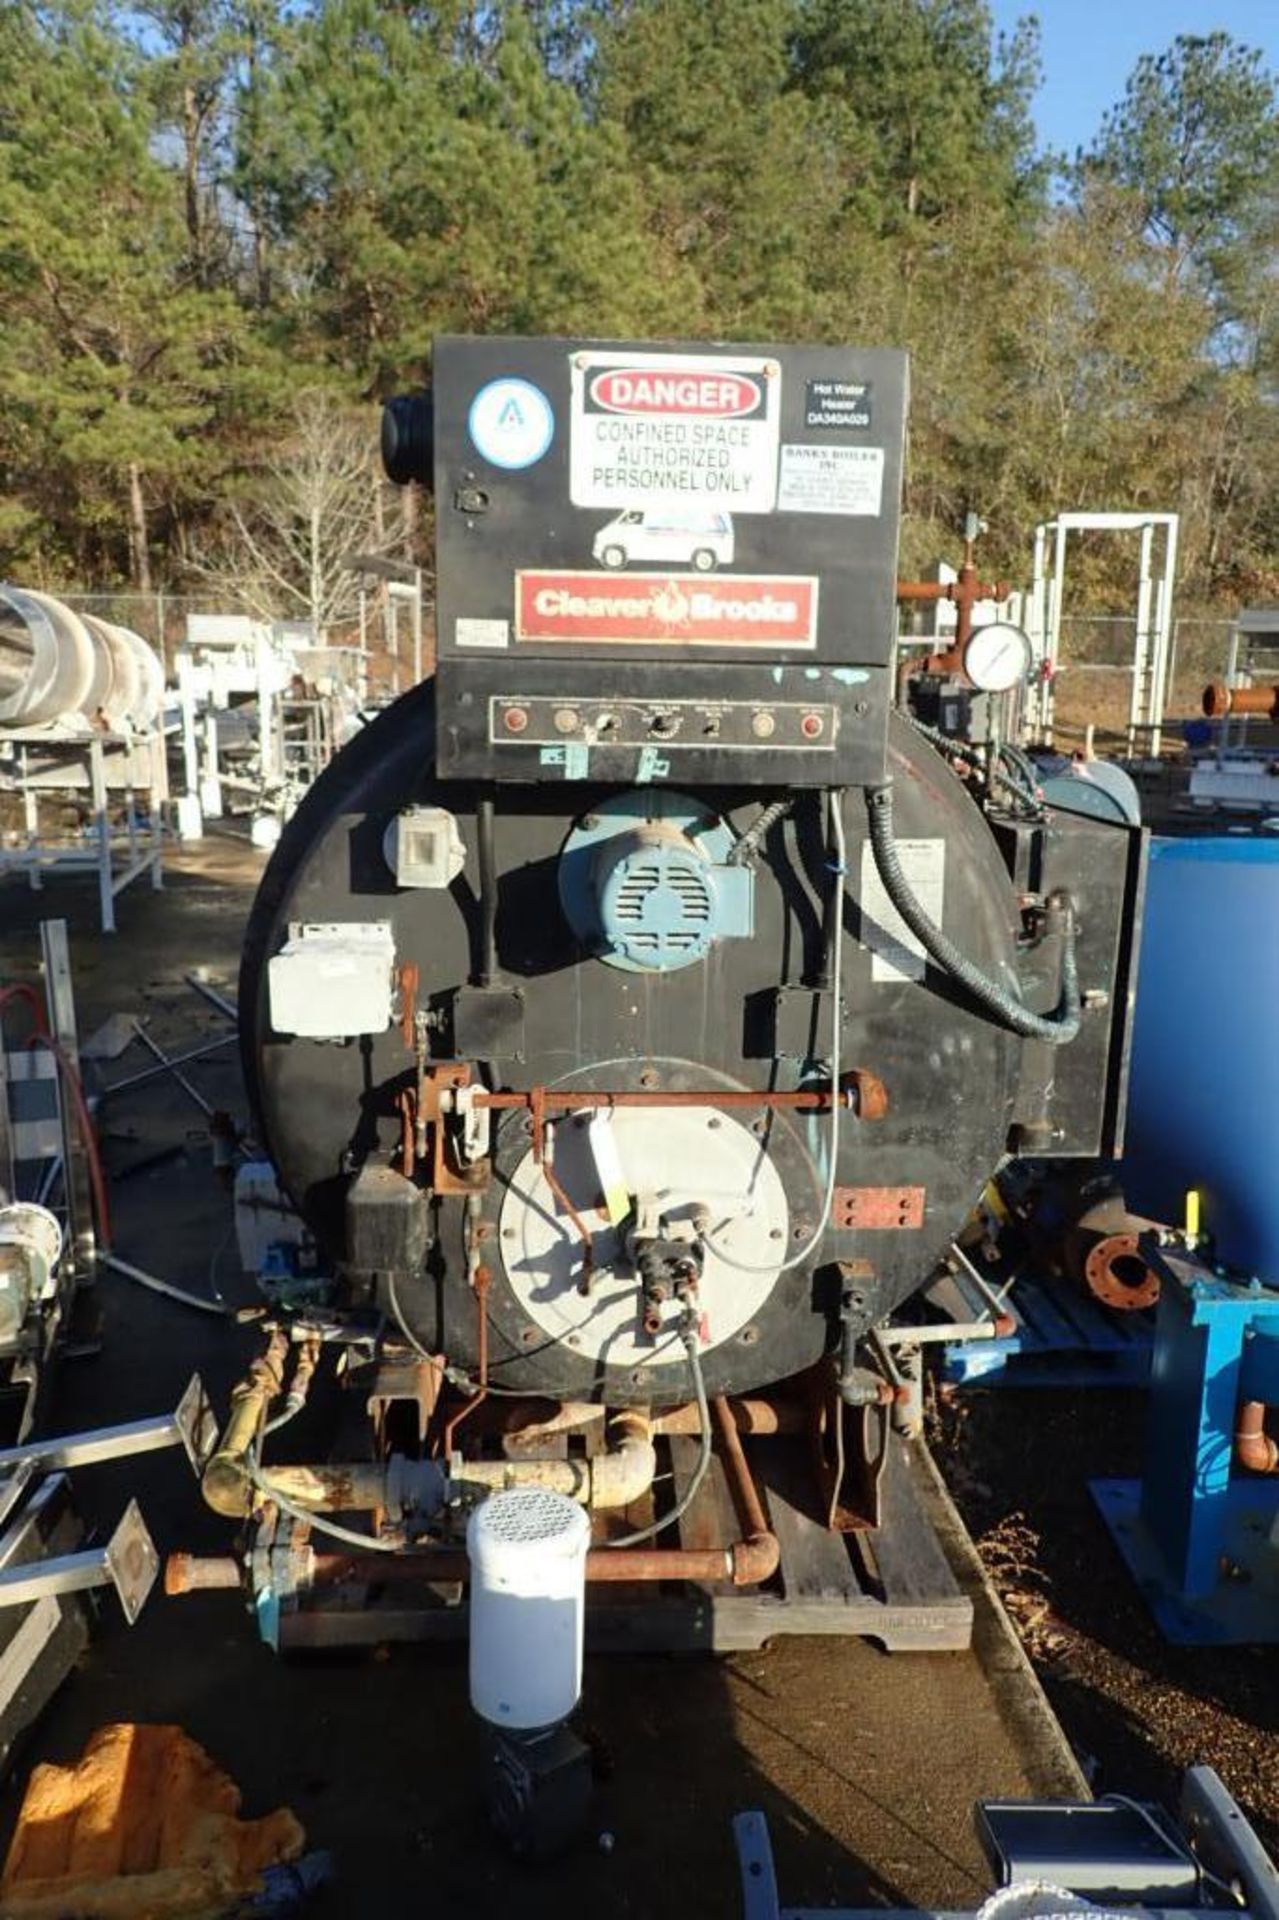 1986 Cleaver Brooks packed boiler, SN L-81680, with misc. components - ** Located in Dothan, Alabama